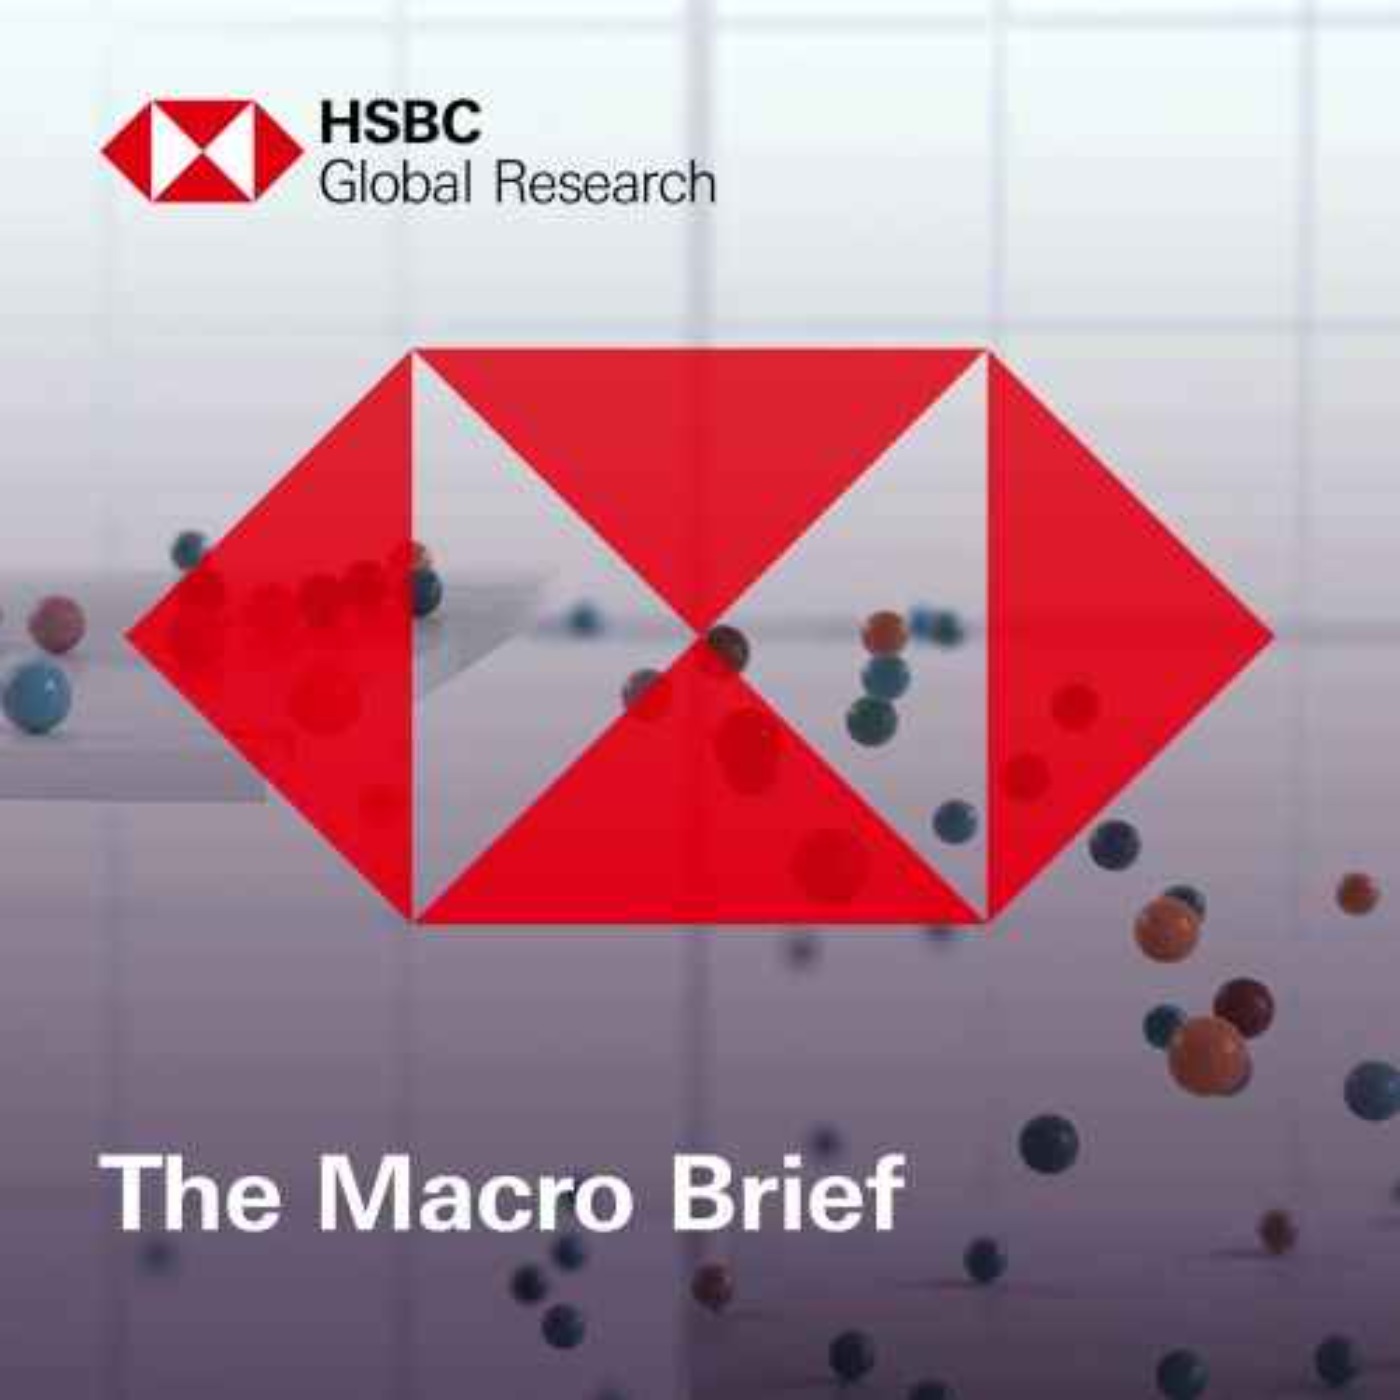 The Macro Brief – Risks and equity markets